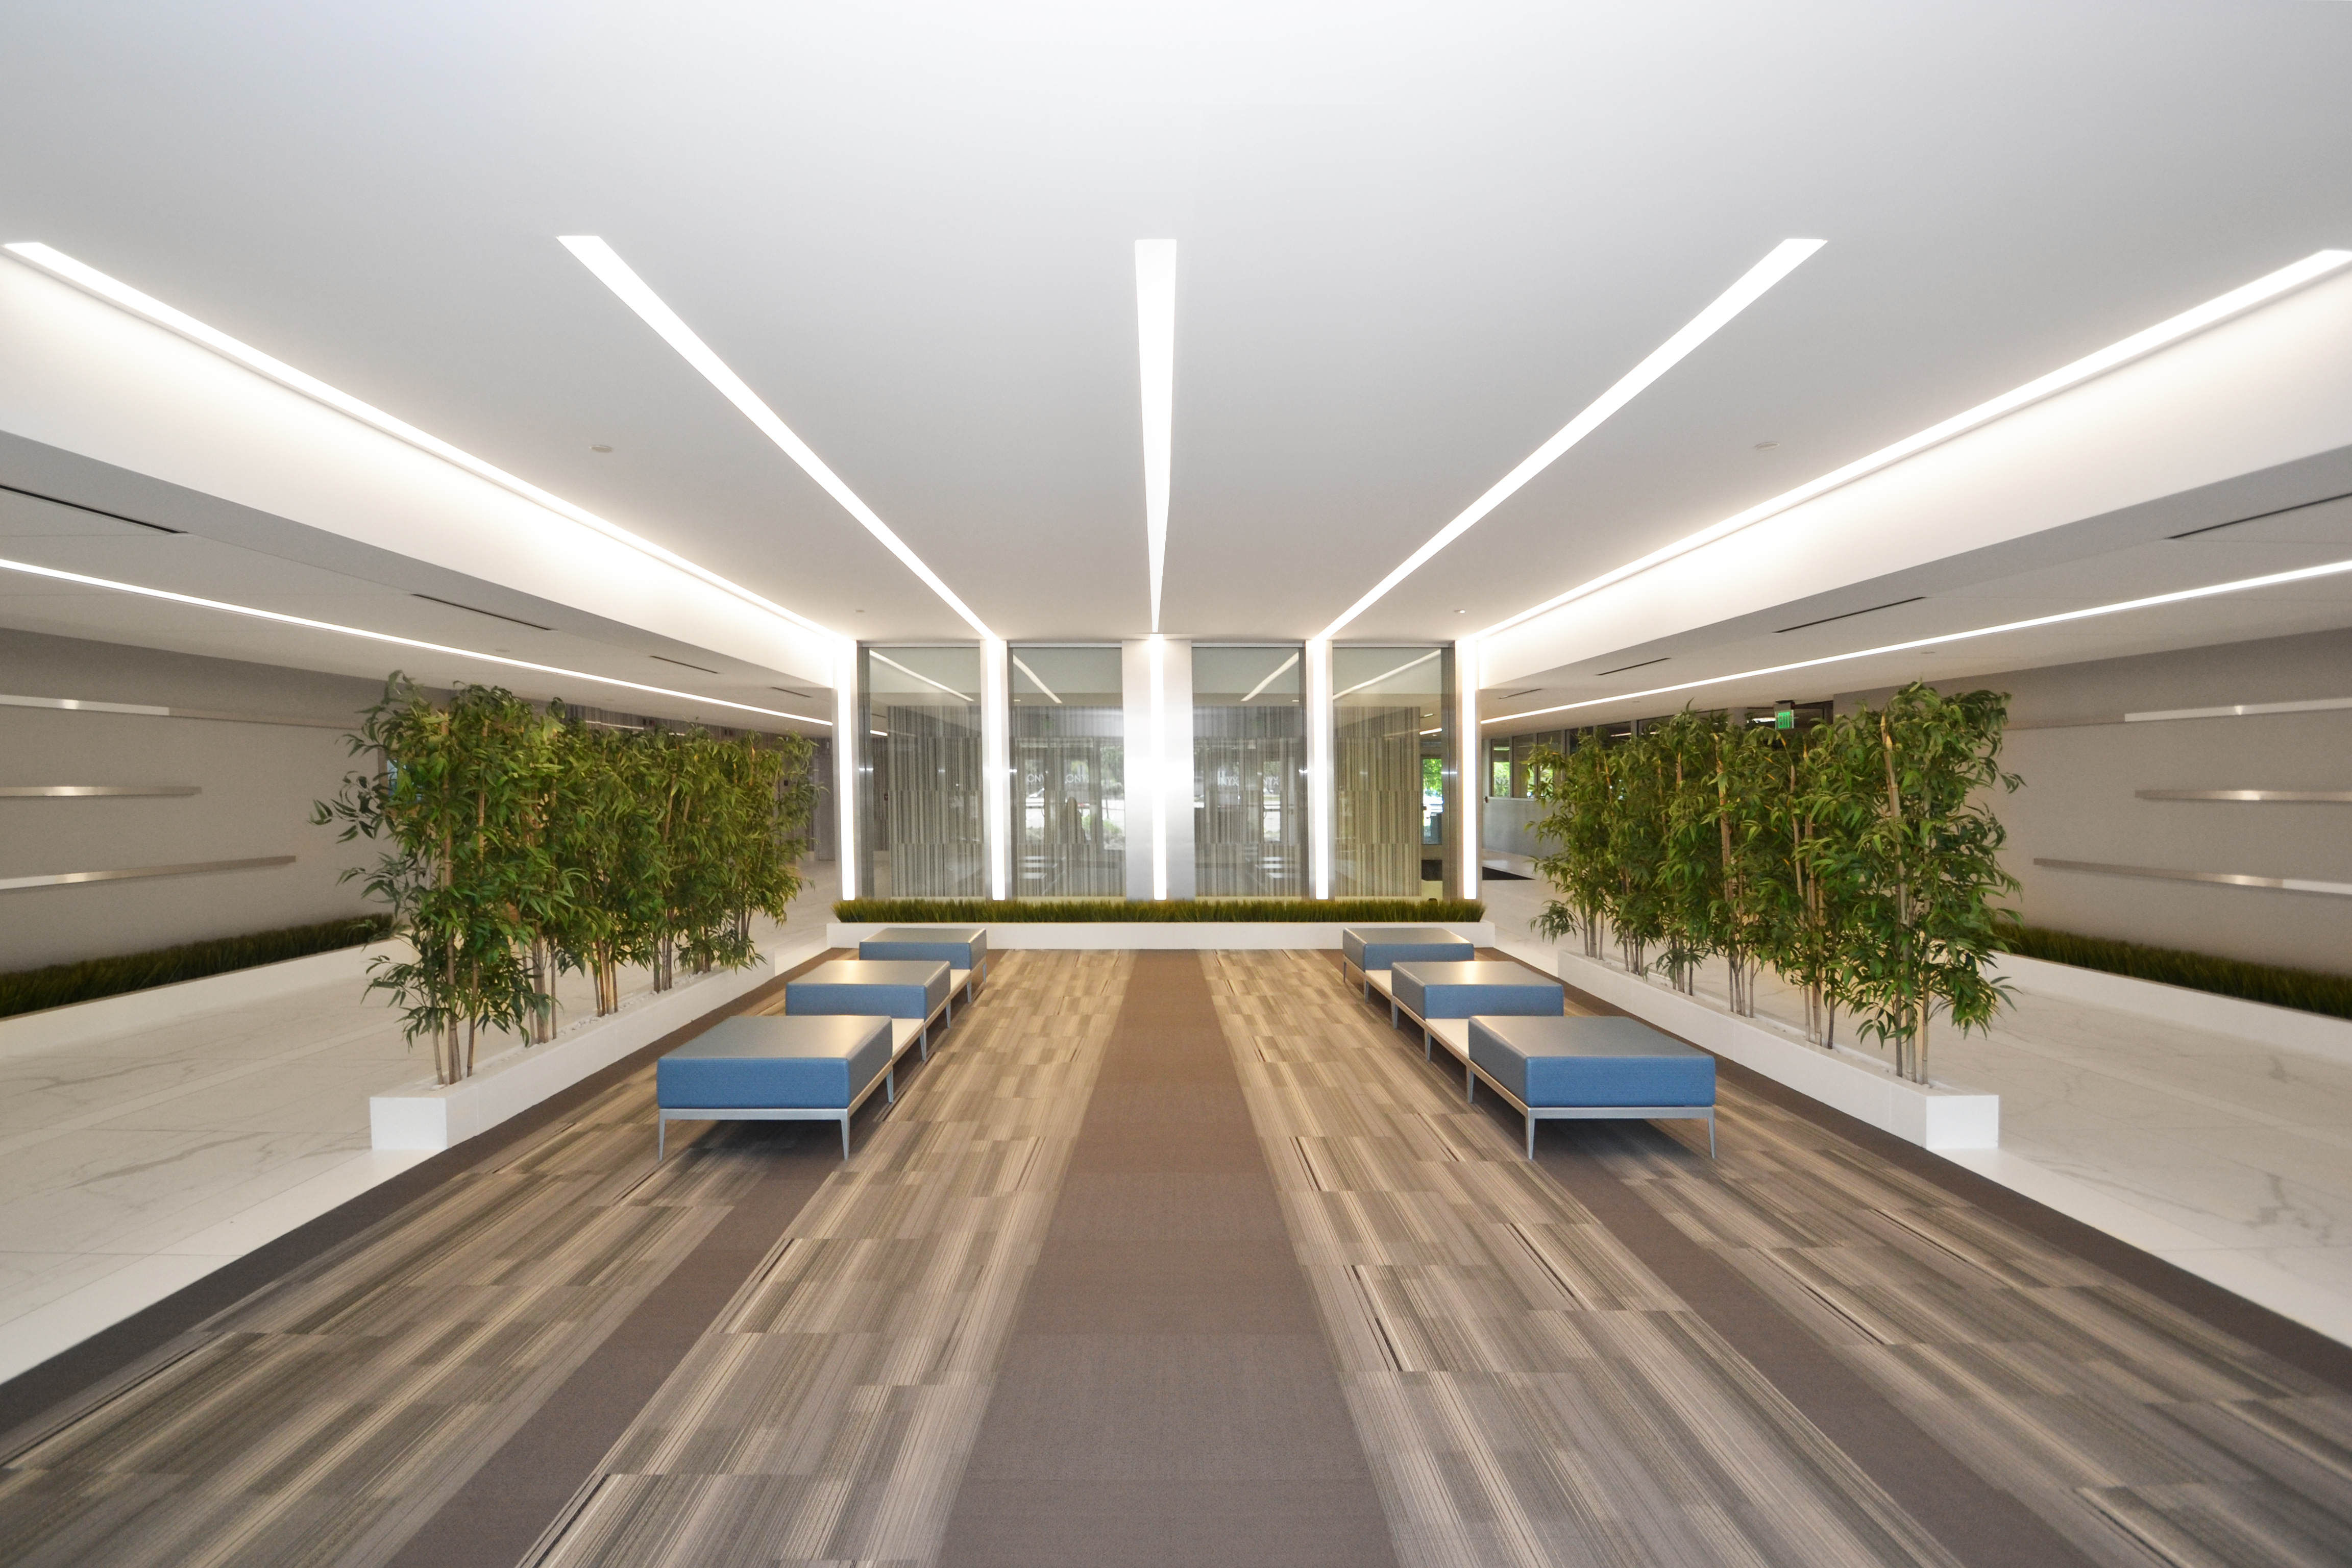 MODERN OFFICE INTERIOR BRINGS BUILDING INTO THE NEW MILLENNIUM ...